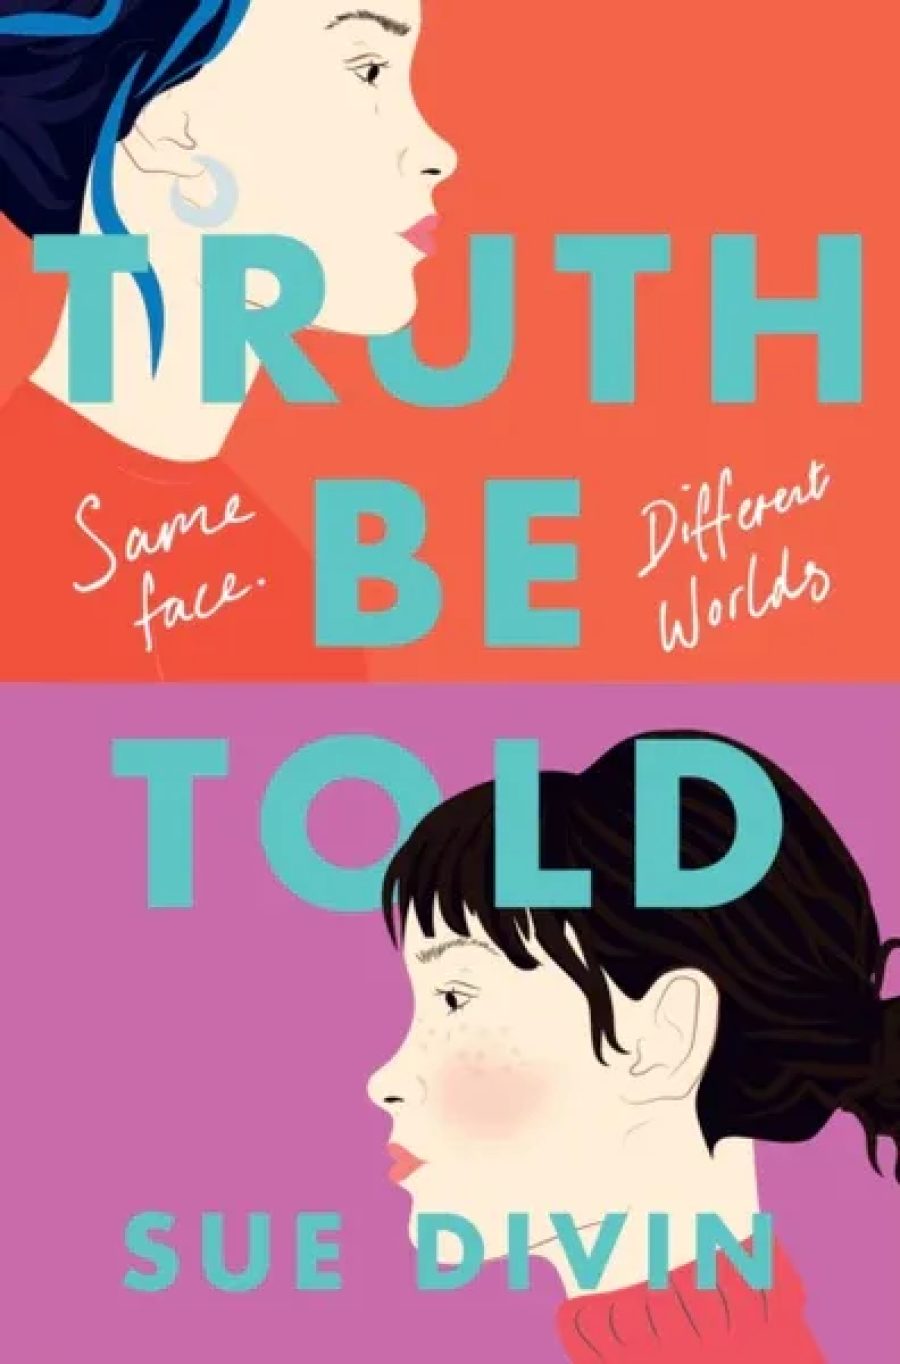 Book cover of 'Truth be Told' by Sue Divin. Two illustrated heads each in a different colour block.